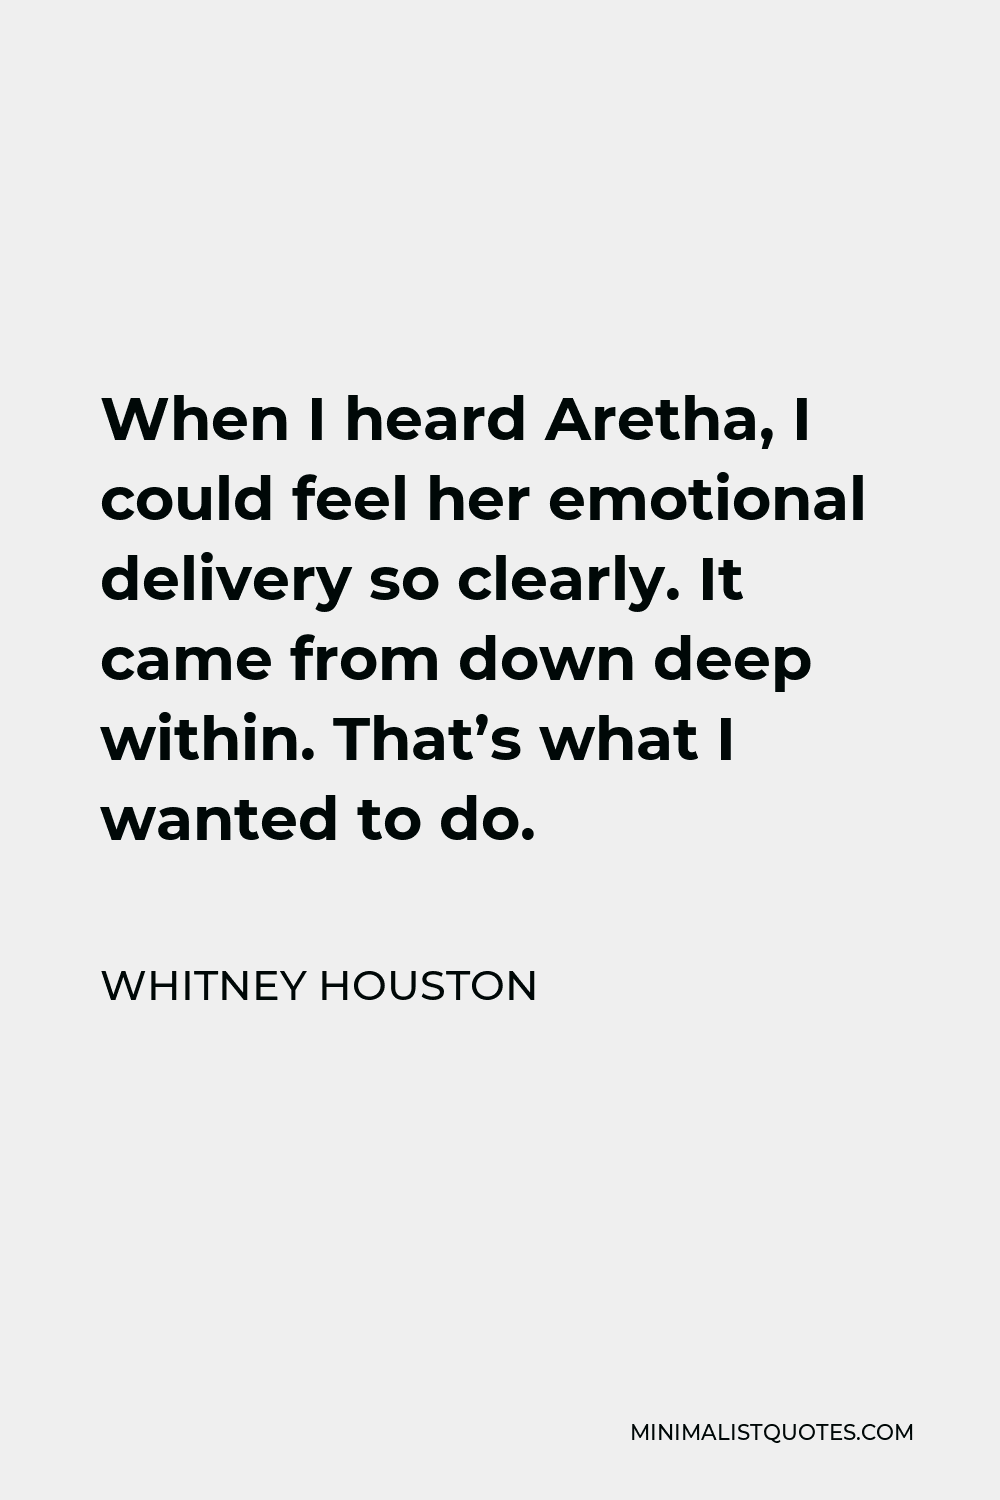 Whitney Houston Quote - When I heard Aretha, I could feel her emotional delivery so clearly. It came from down deep within. That’s what I wanted to do.